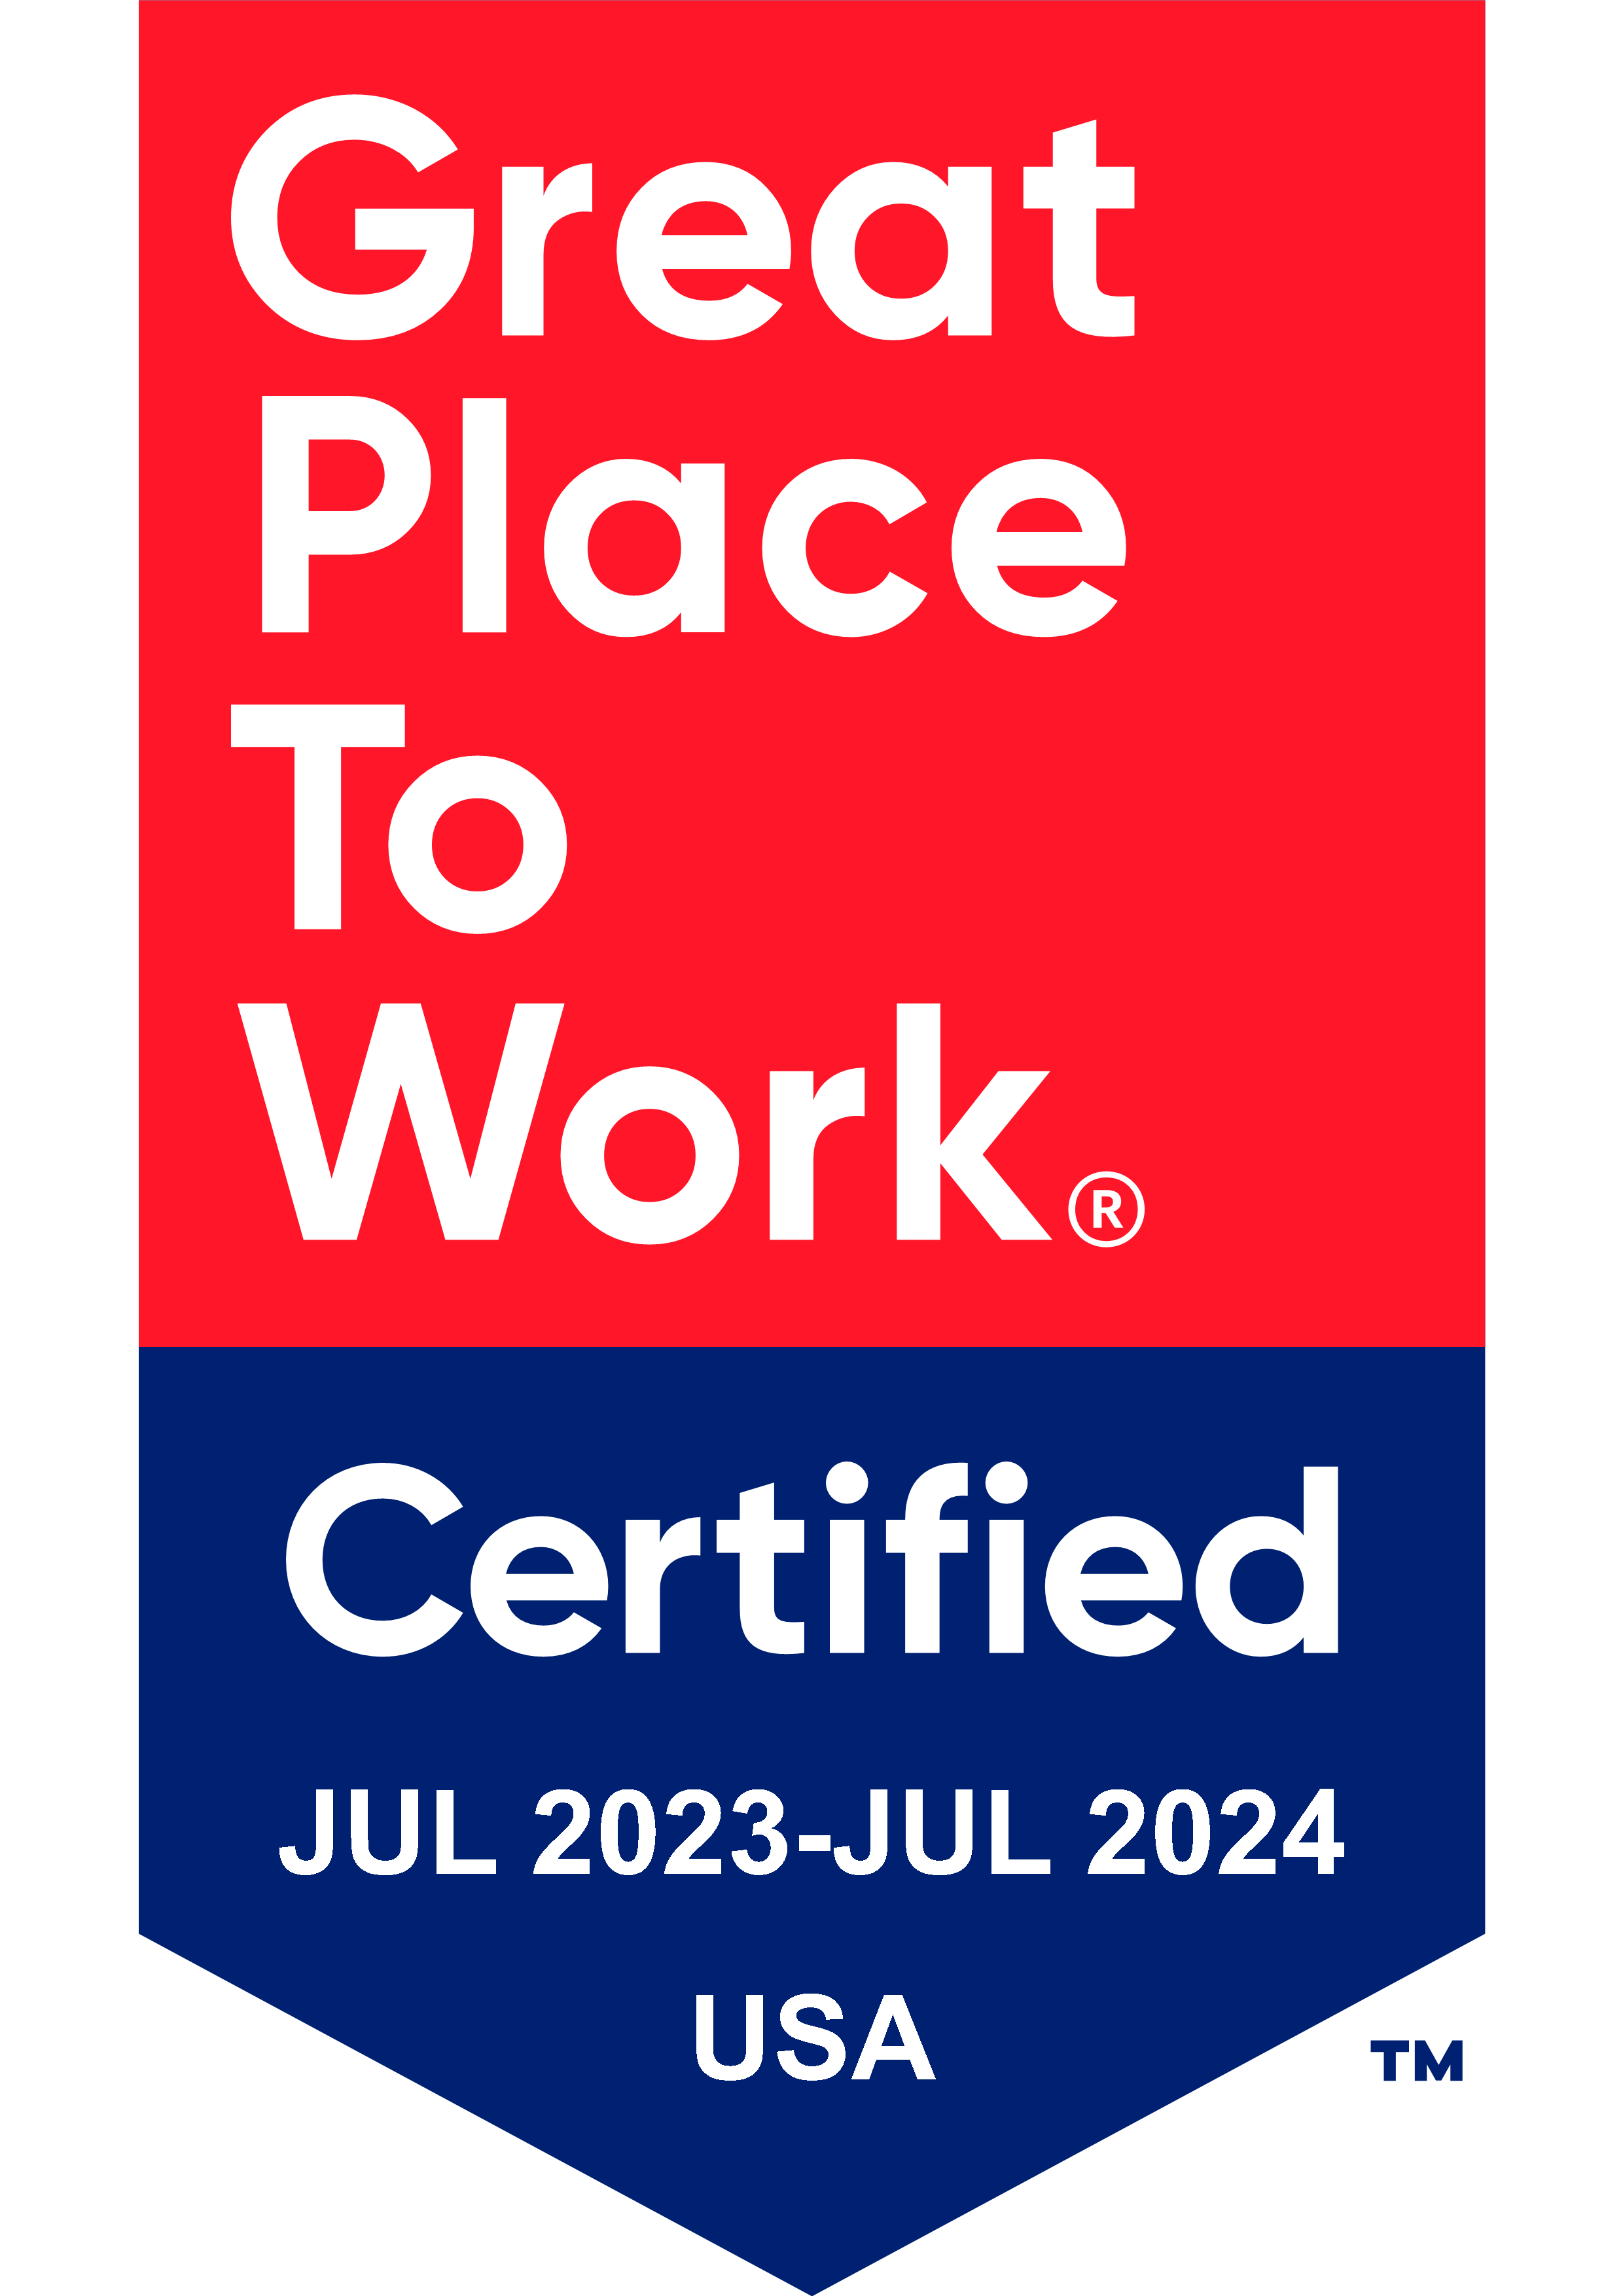 Great Place to Work certified July 2023-June 2024